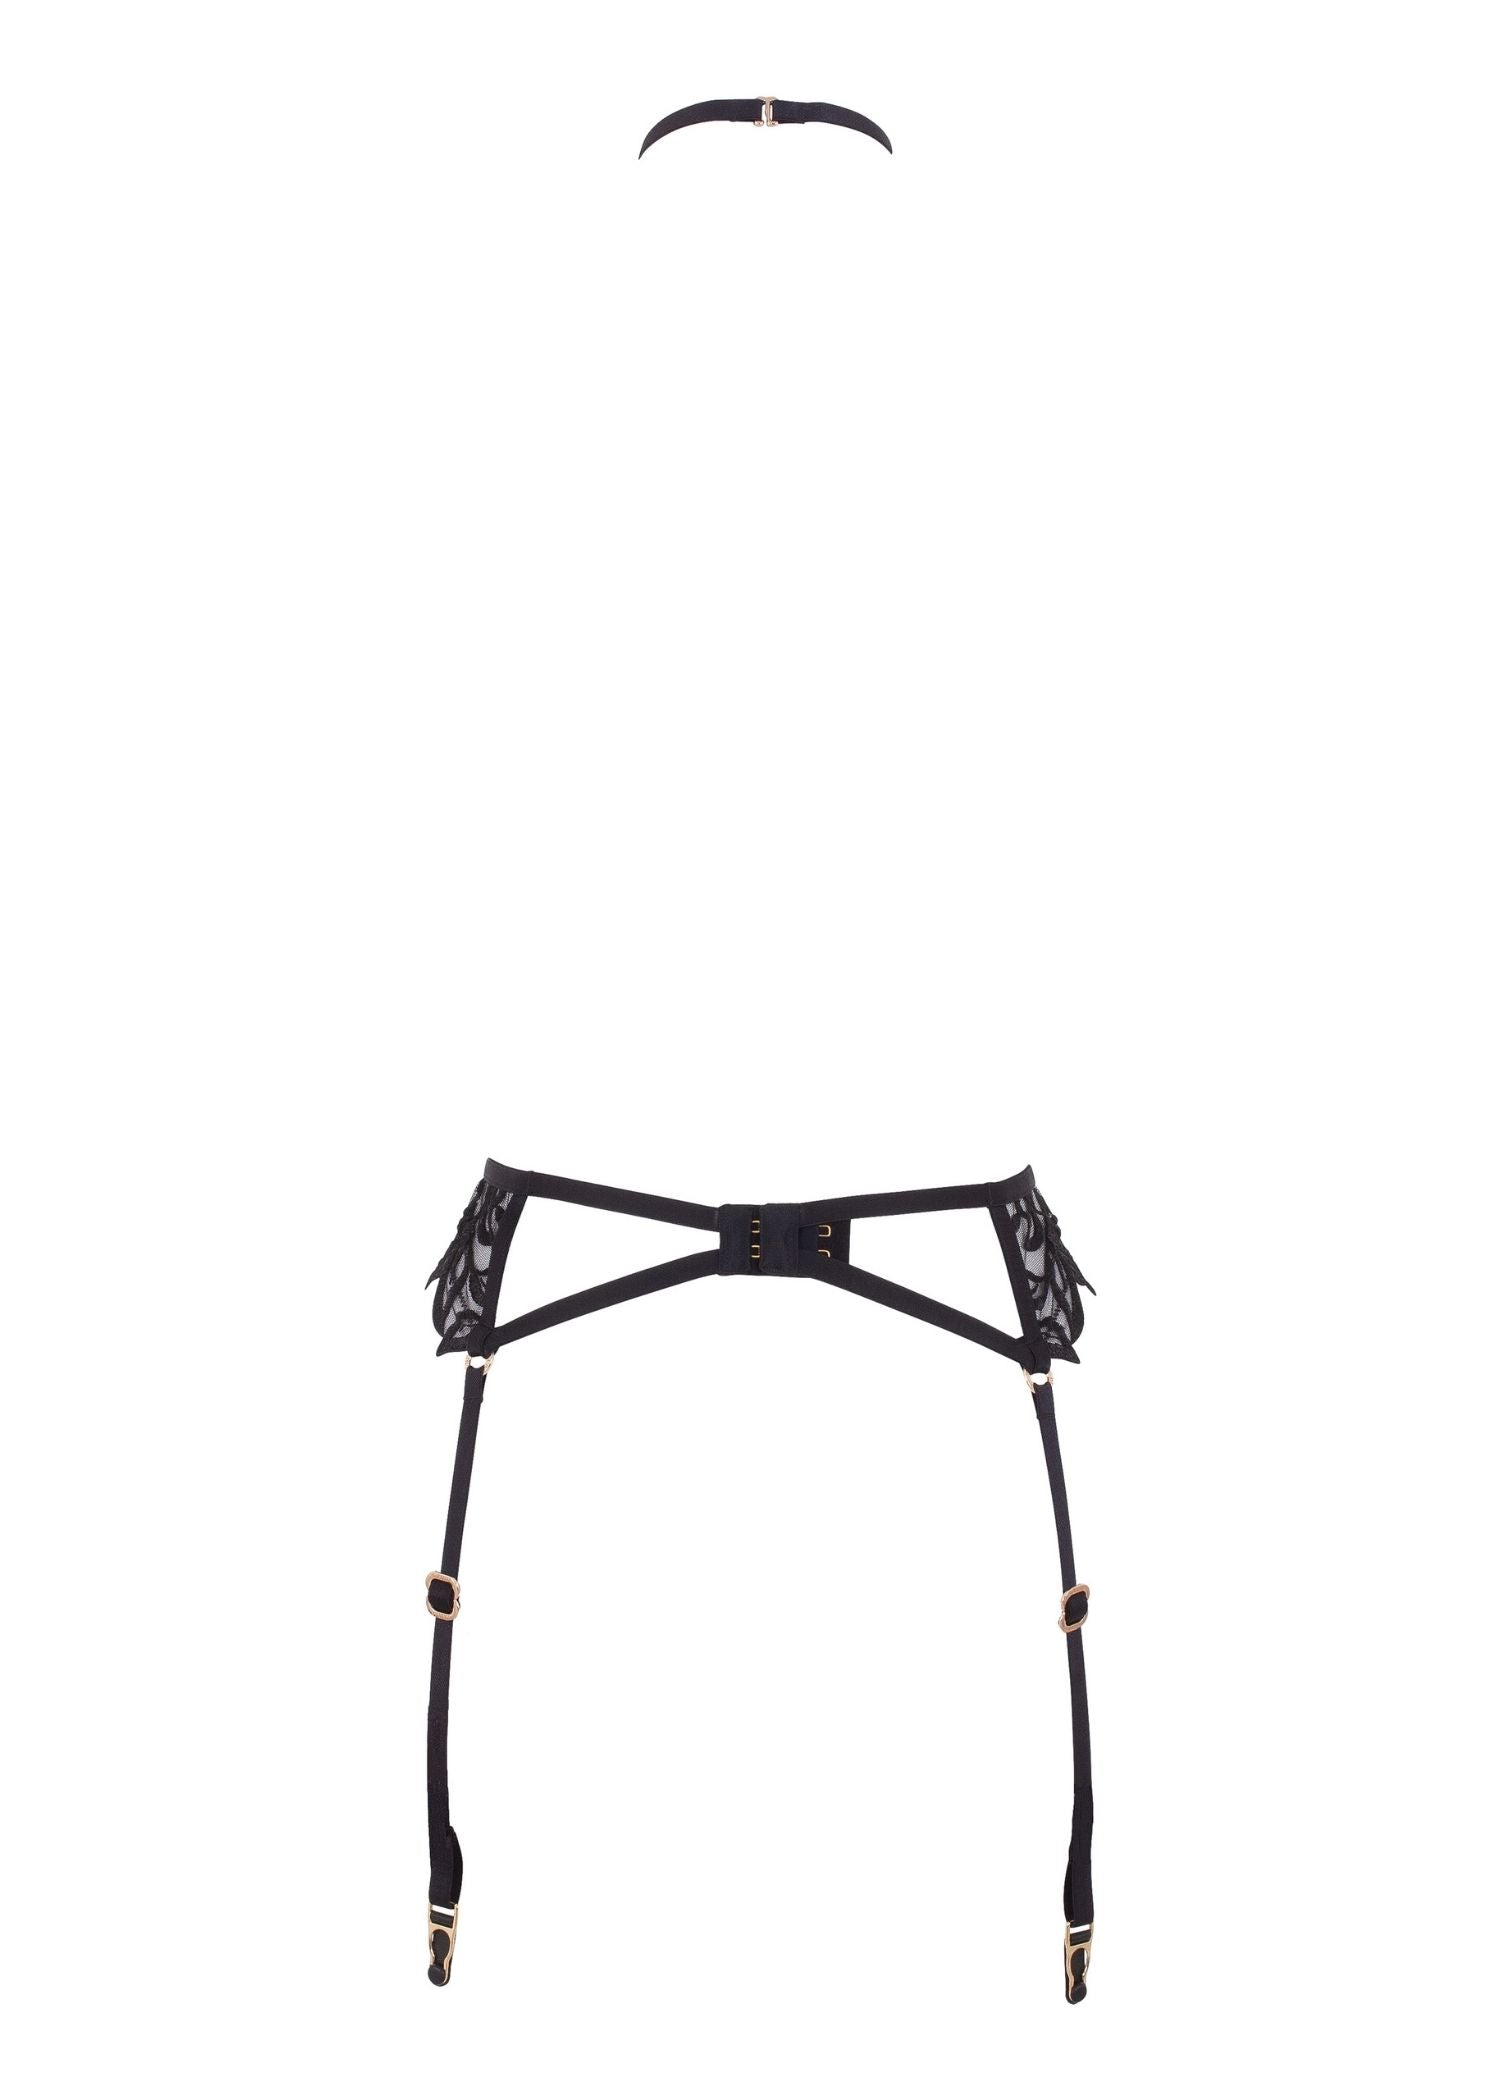 Bluebella Isadora Suspender Harness - Avec Amour Sexy Lingerie